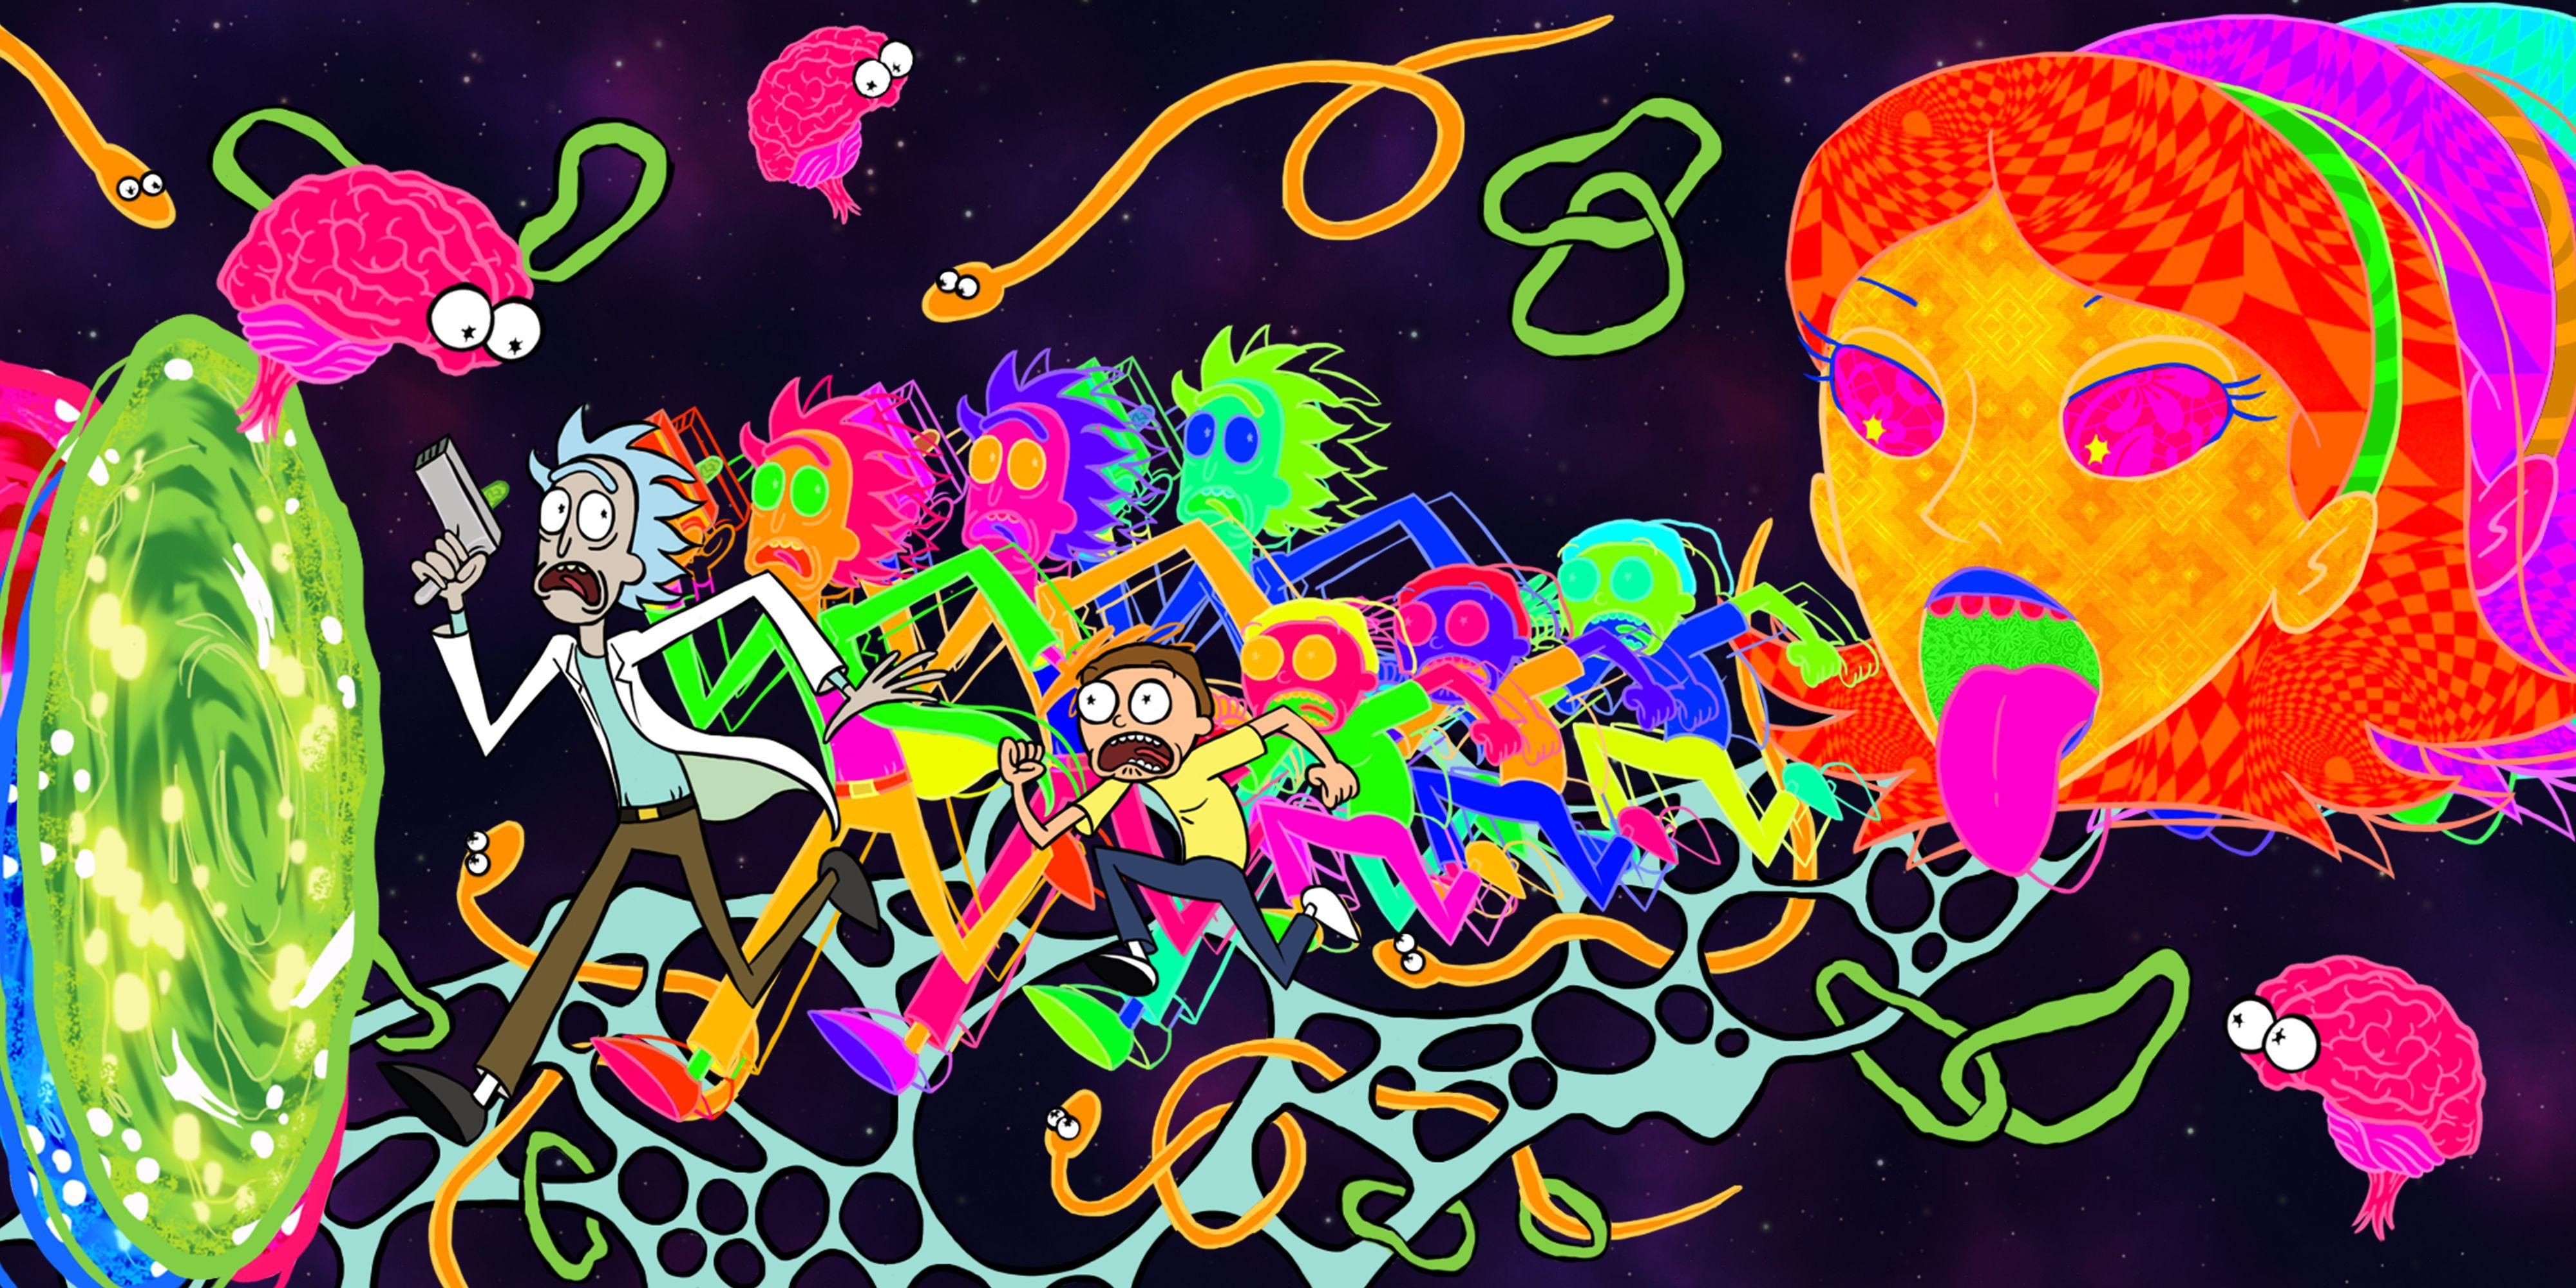 Trippy Rick and morty wallpaper by Hyasat99 - Download on ZEDGE